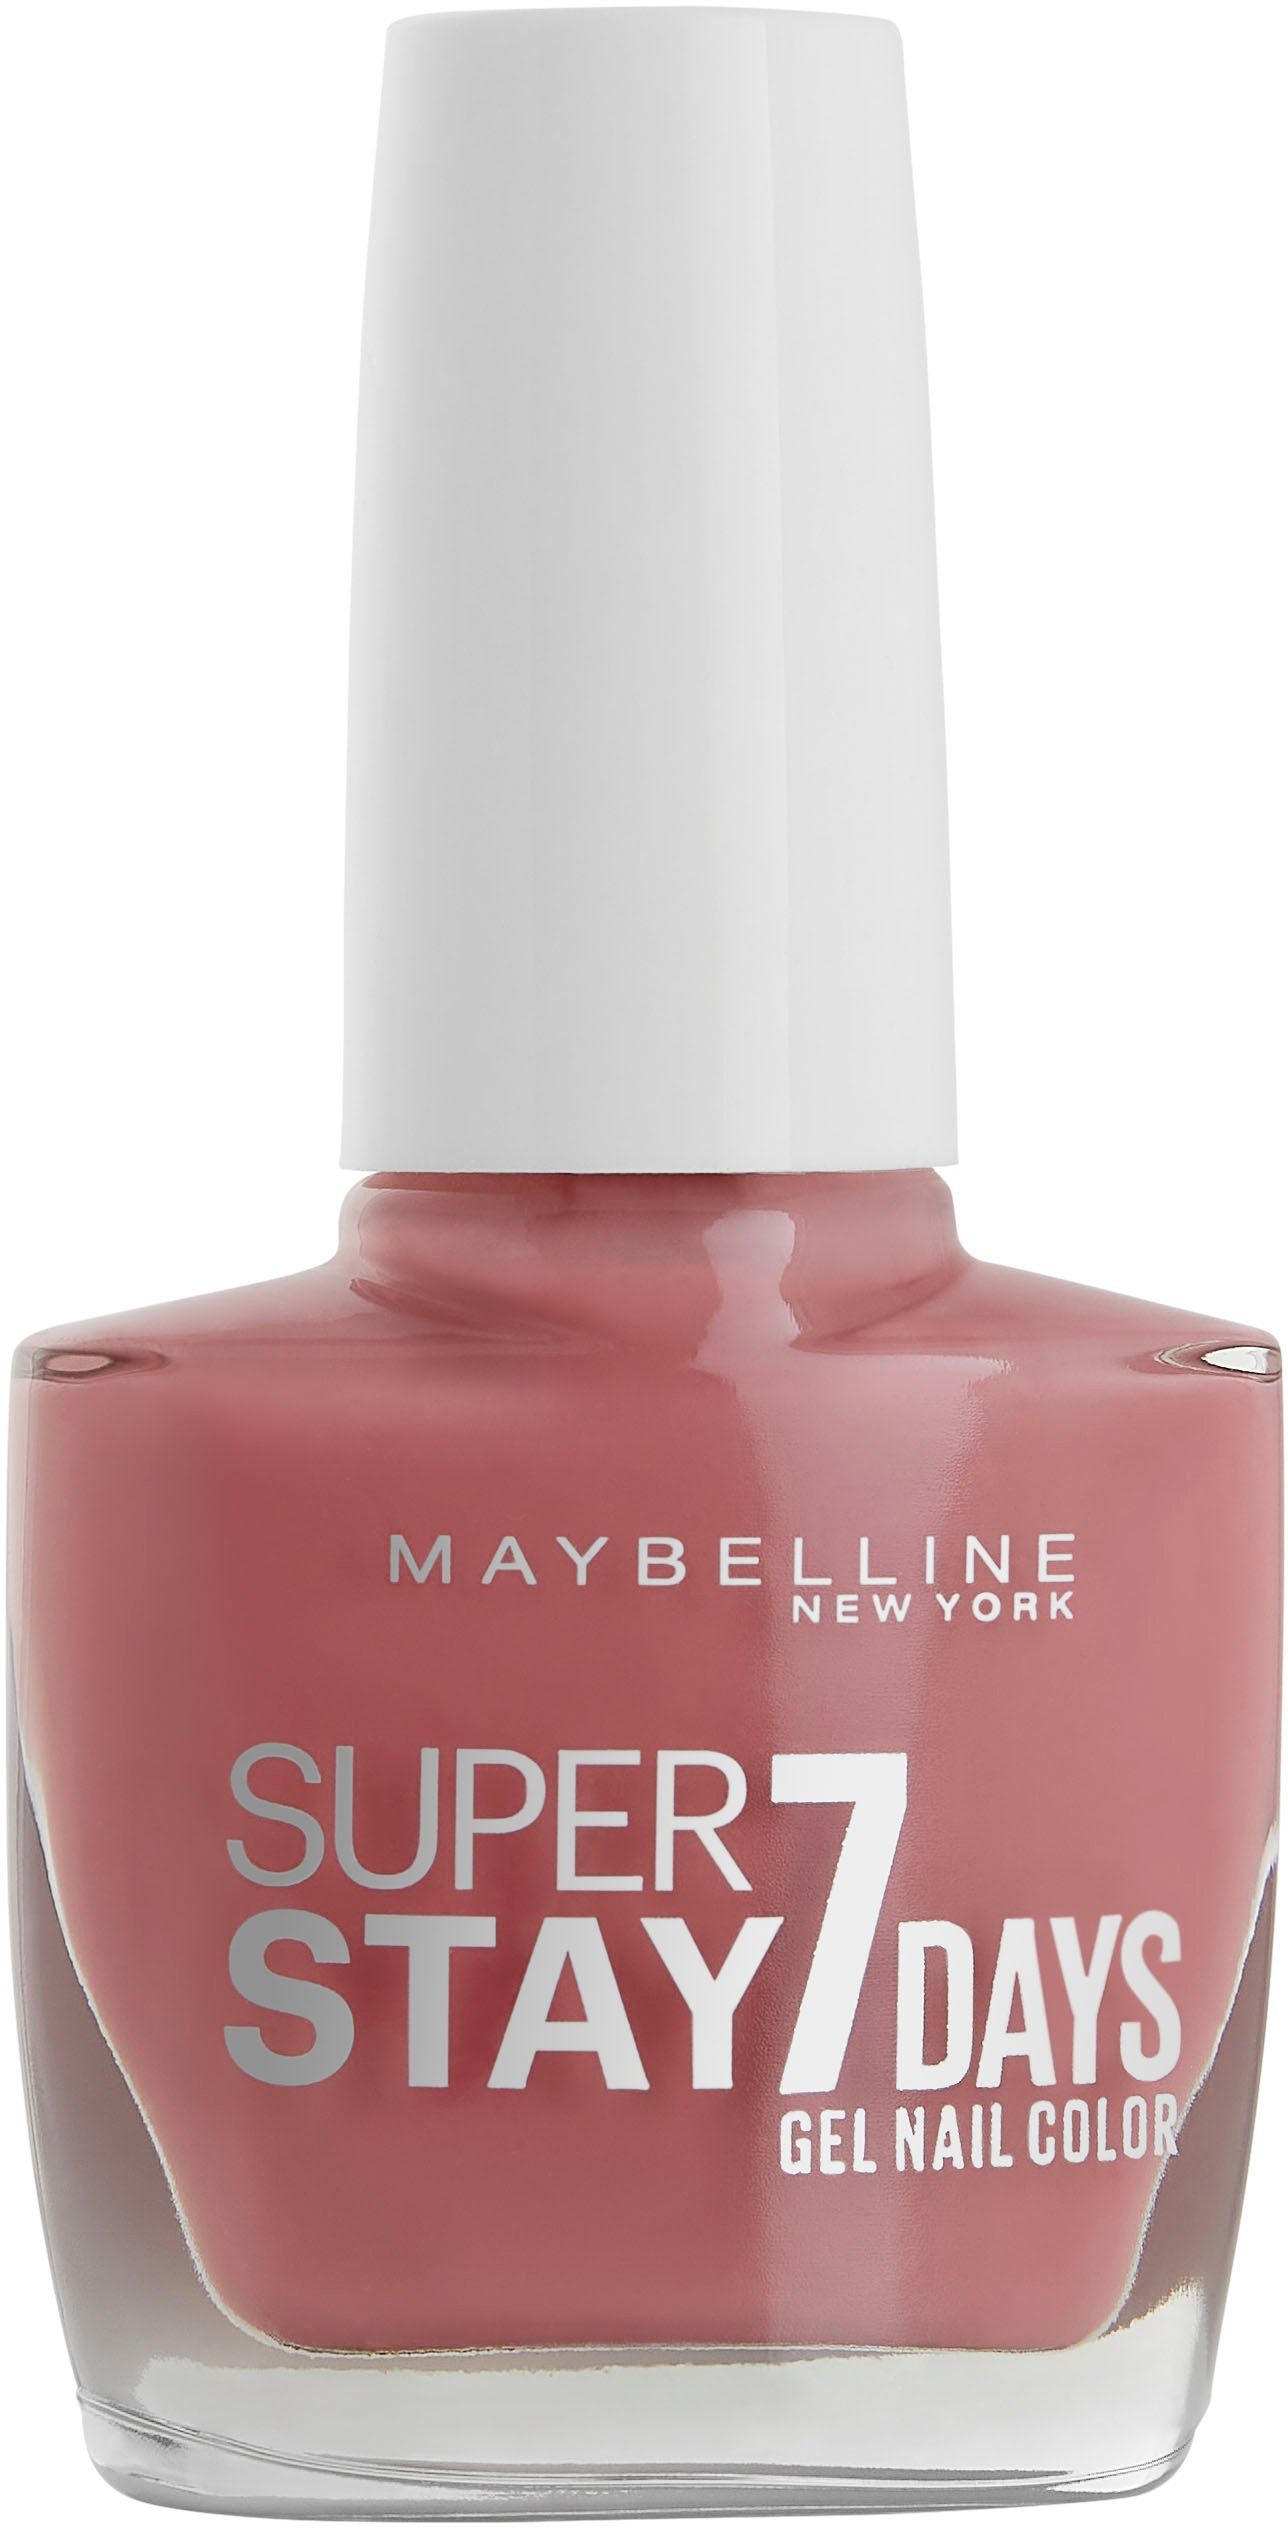 it Days Pink Nagellack about 7 YORK Superstay NEW Nr. 926 MAYBELLINE